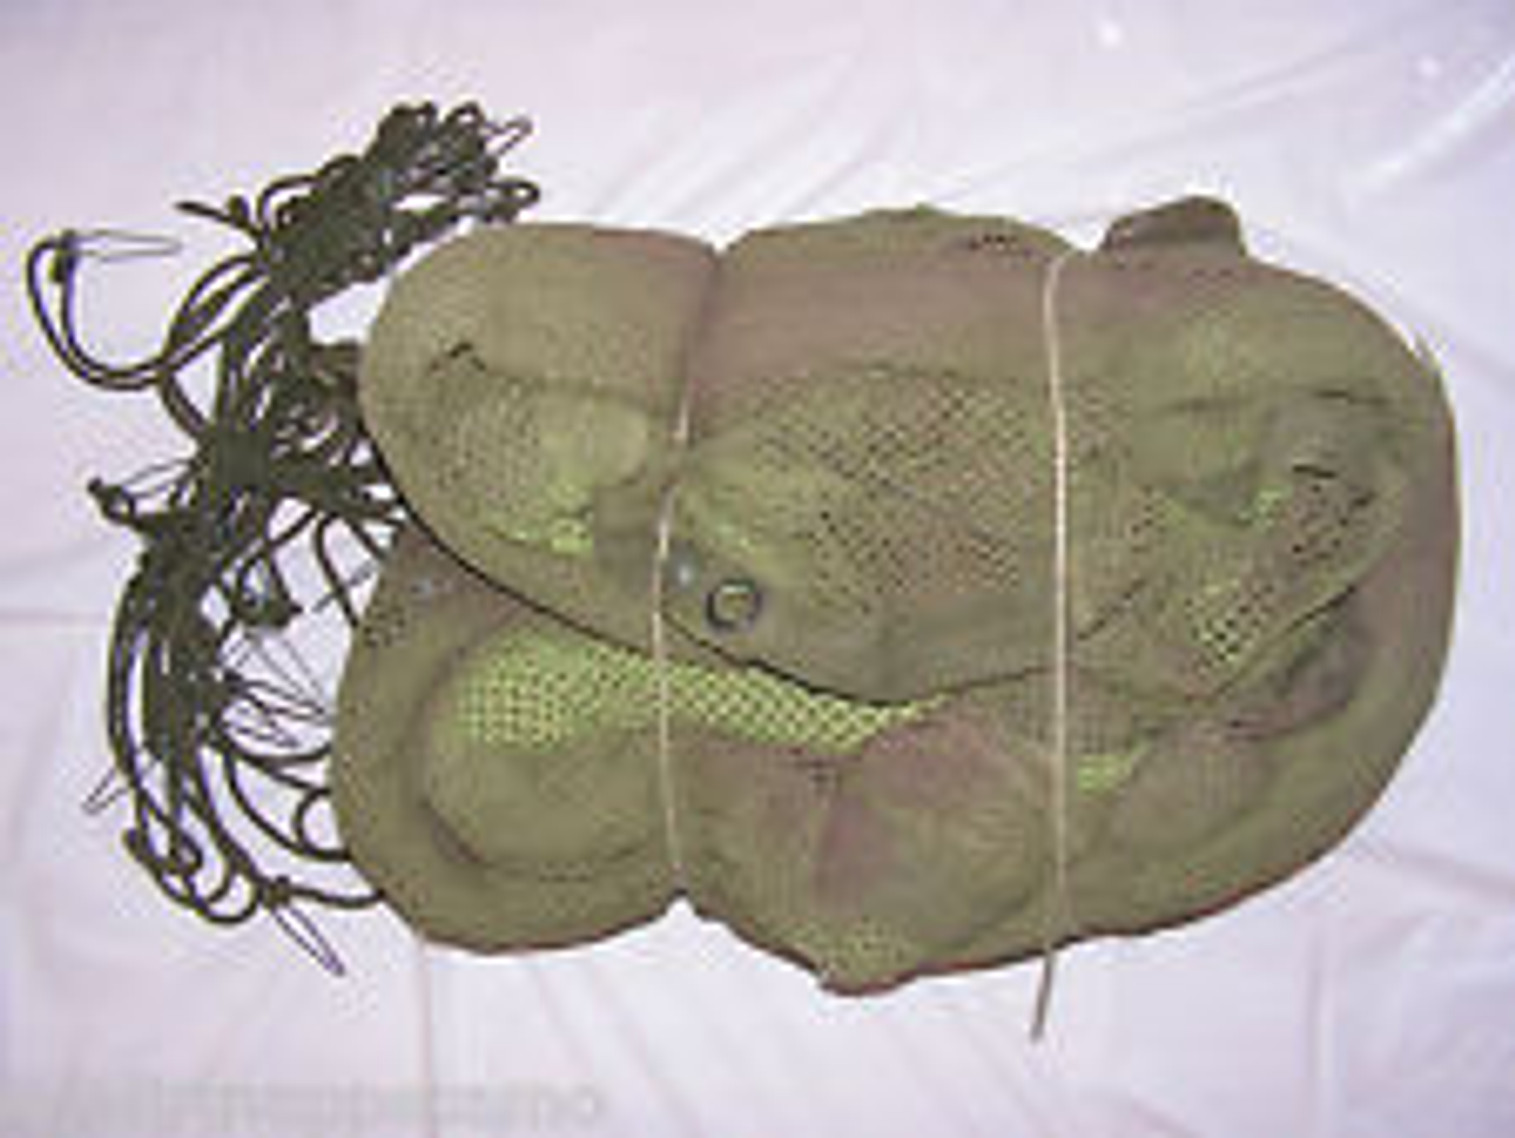 Swiss Military Issue Camouflage Netting - 20' x 20'